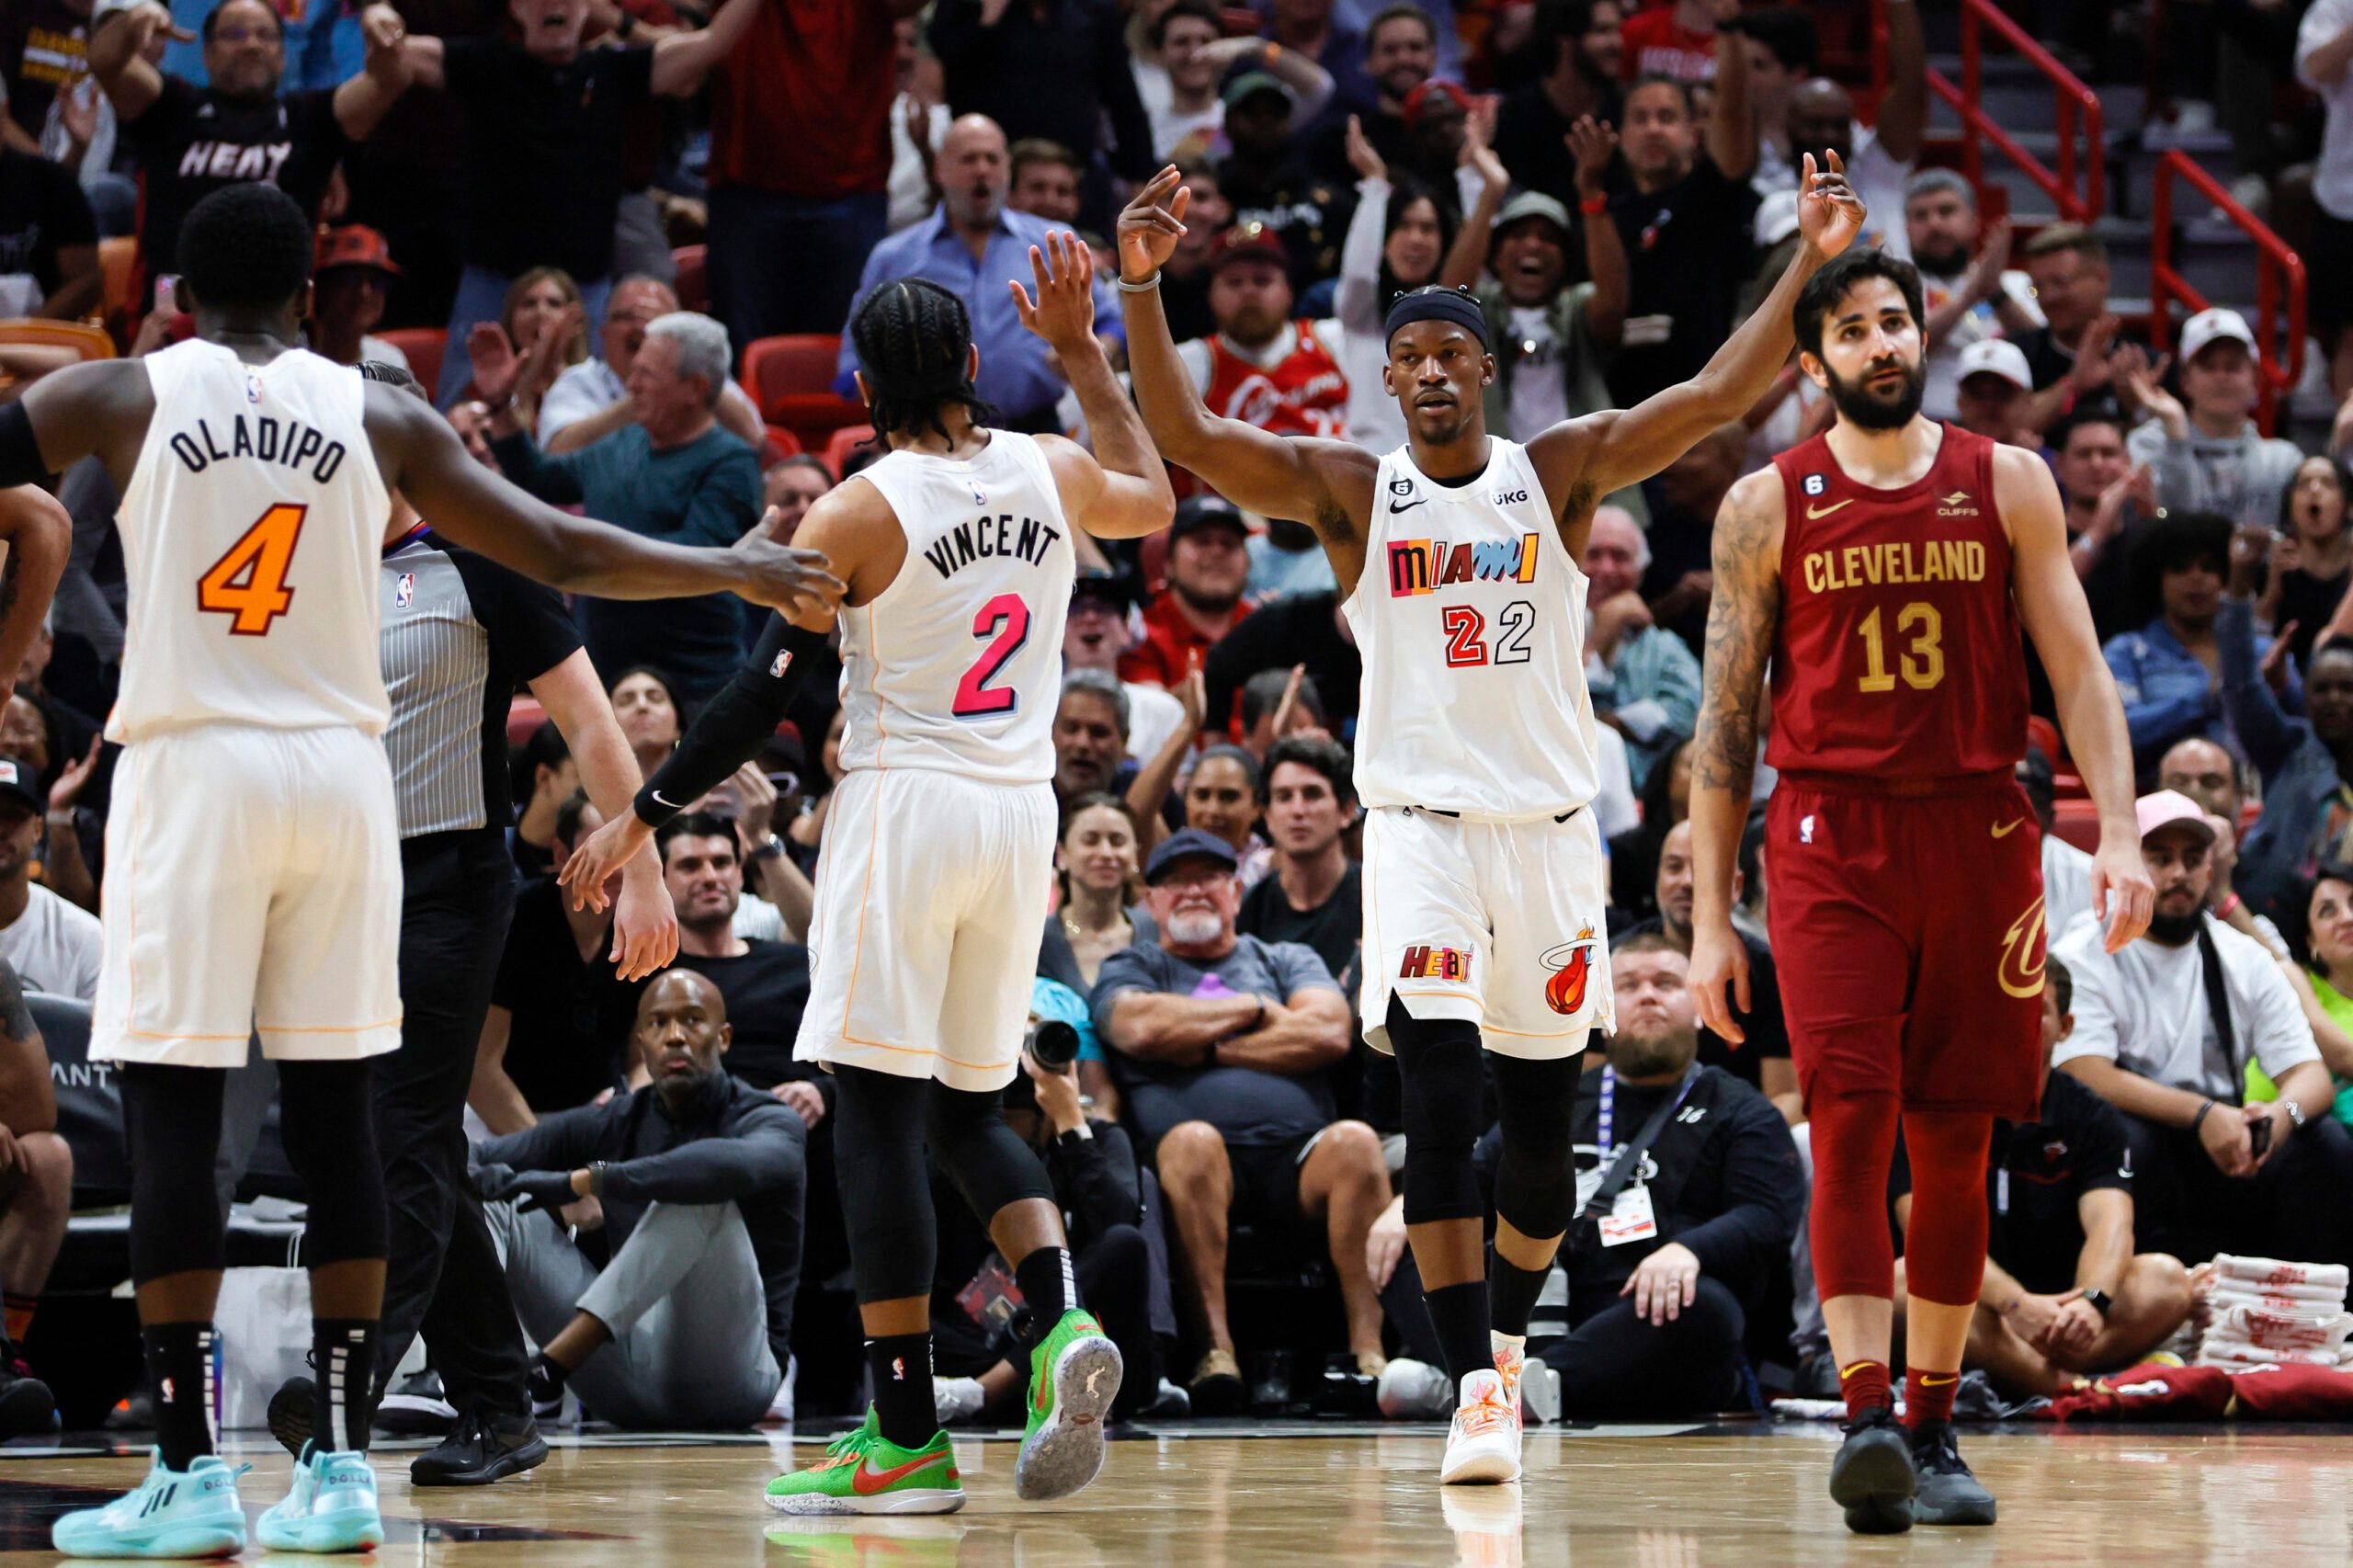 Jimmy Butler pulls through in clutch as Heat escape Cavaliers